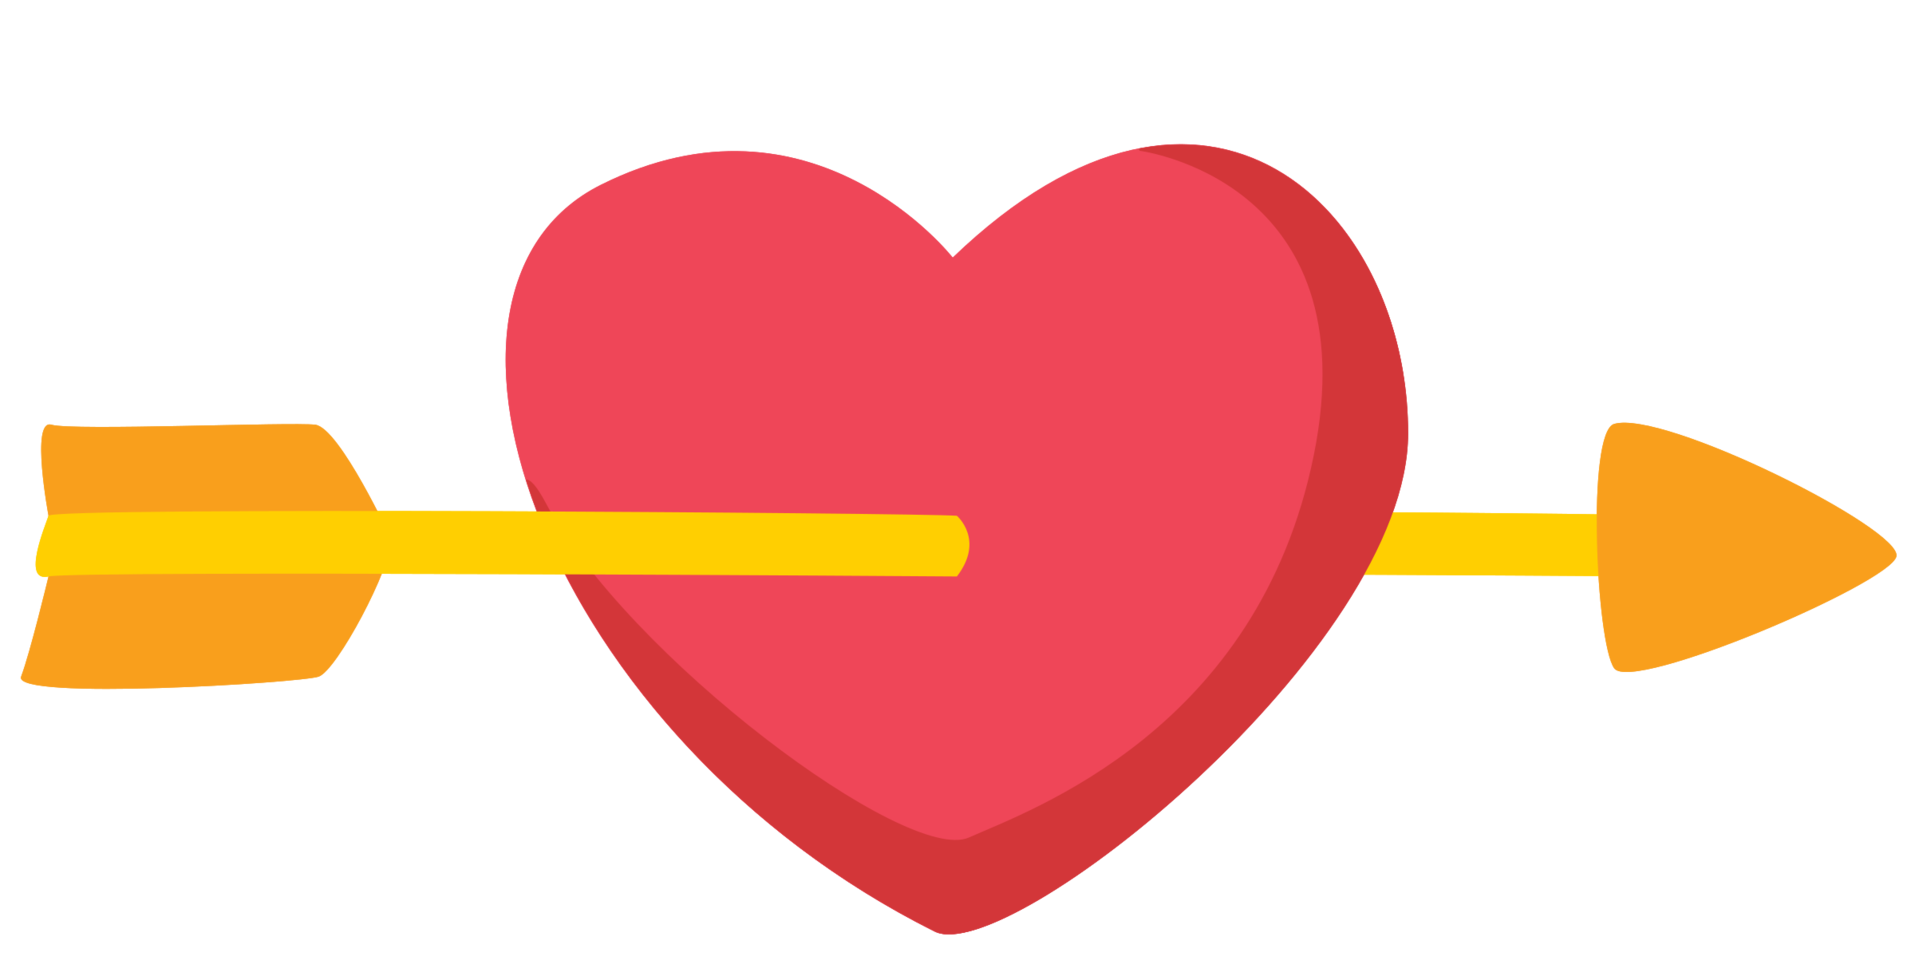 Heart Pic Arrow Free Transparent Image HD PNG Image